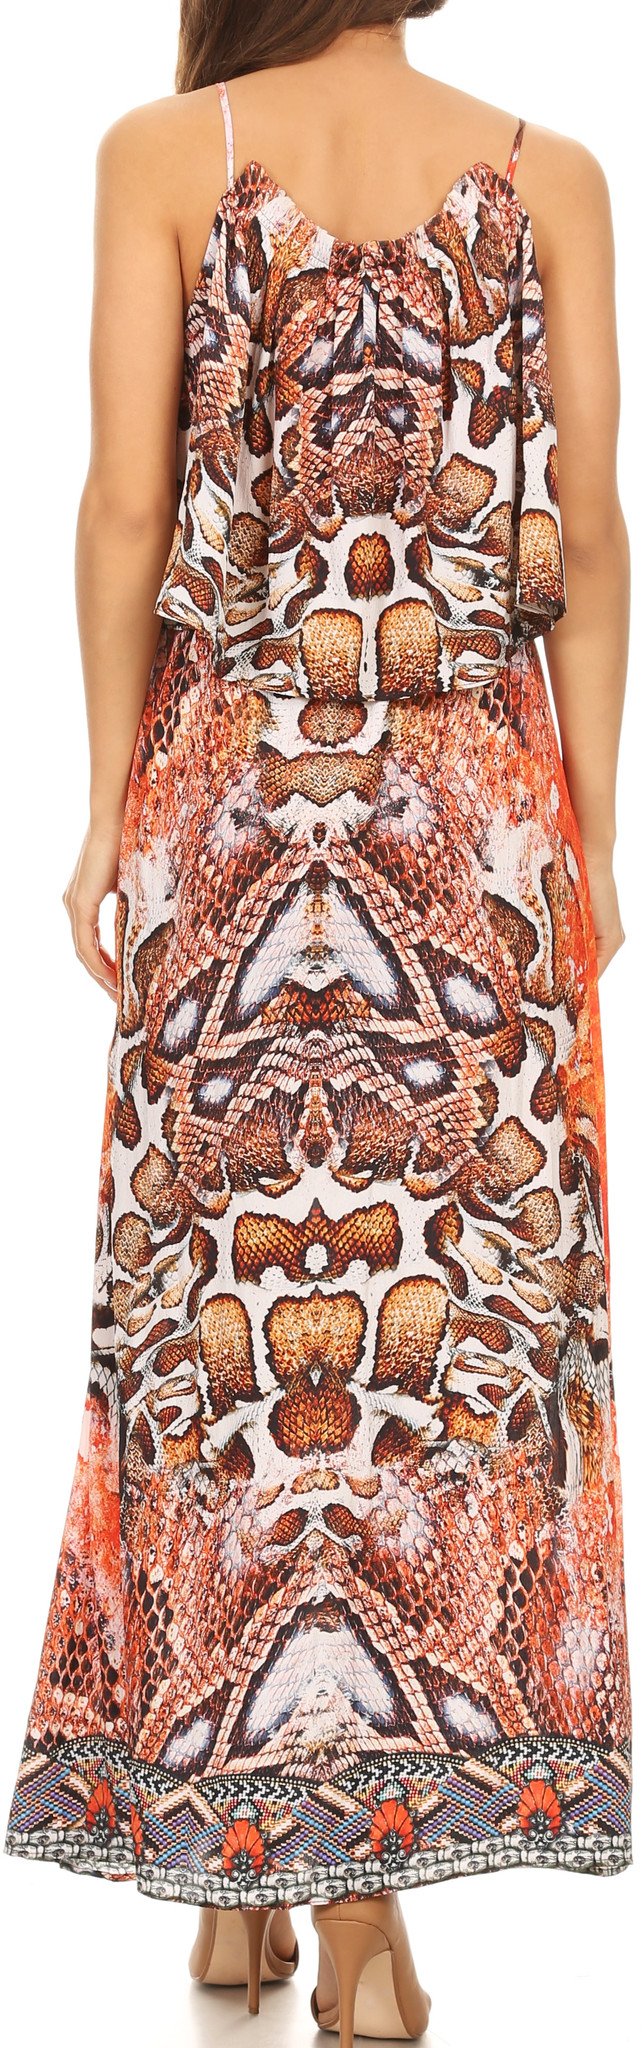 Sakkas Itika Sleeveless Printed Overlay Maxi Dress | Cover Up with Ruched Neckline